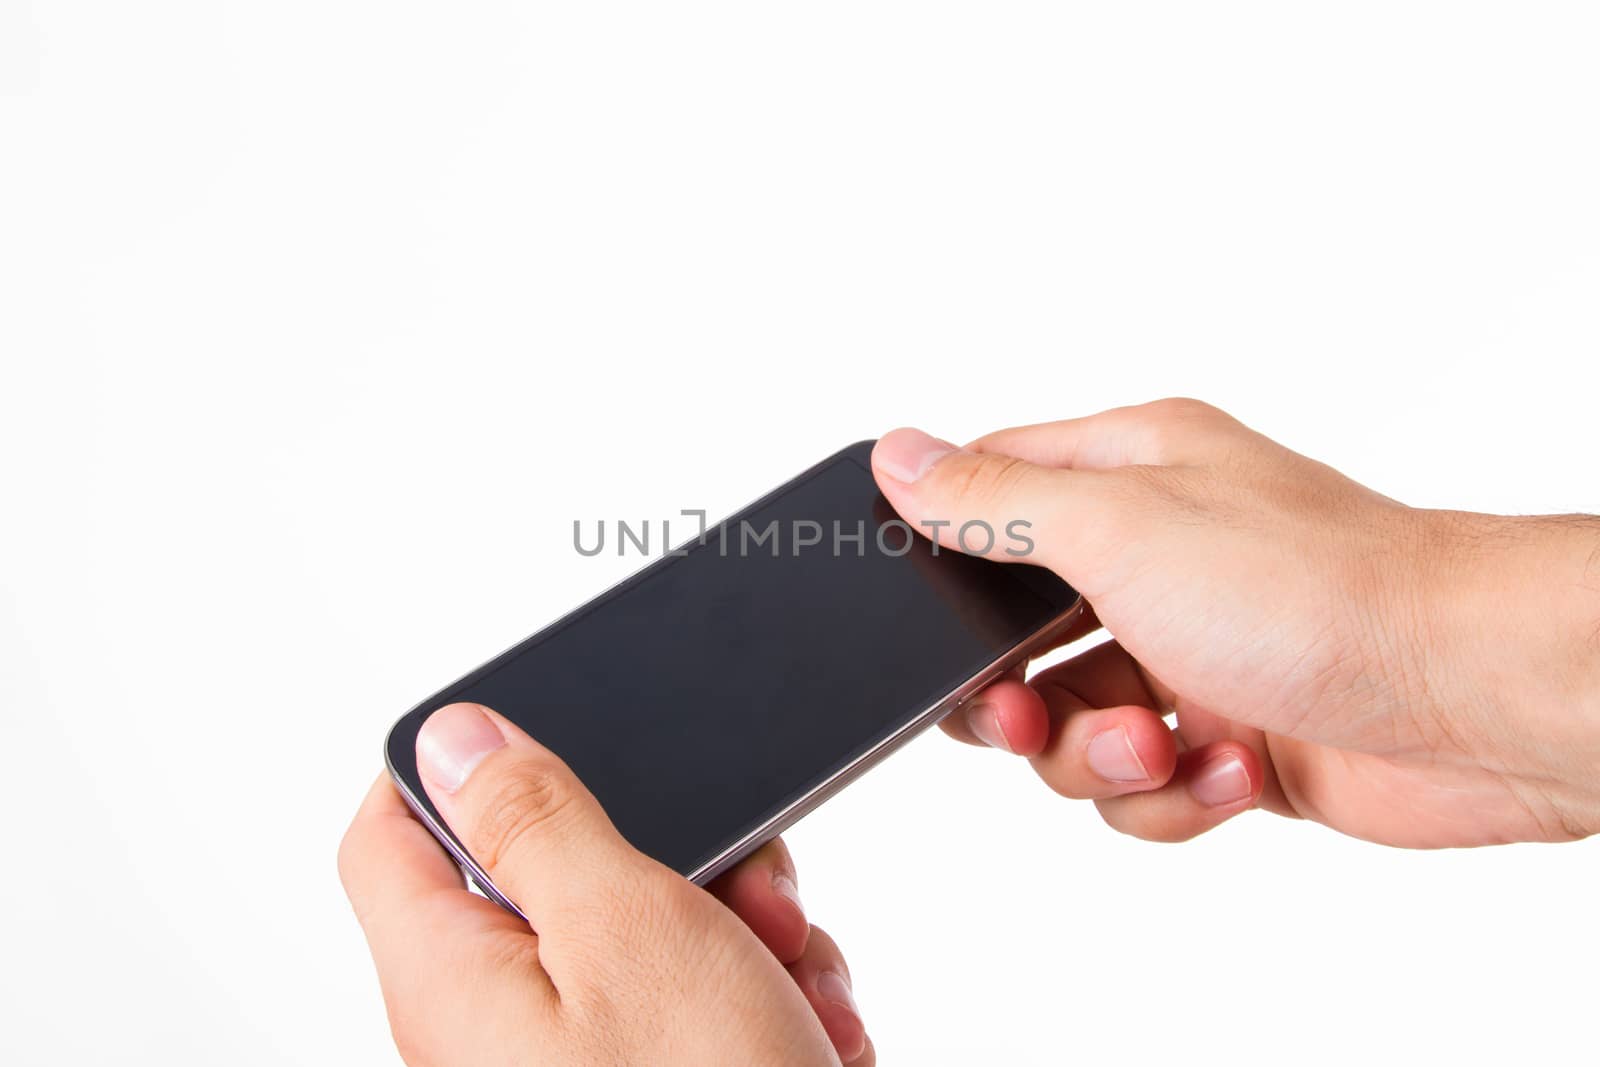 Hand holding smart phone with blank, dark screen, front view, isolated on white background.